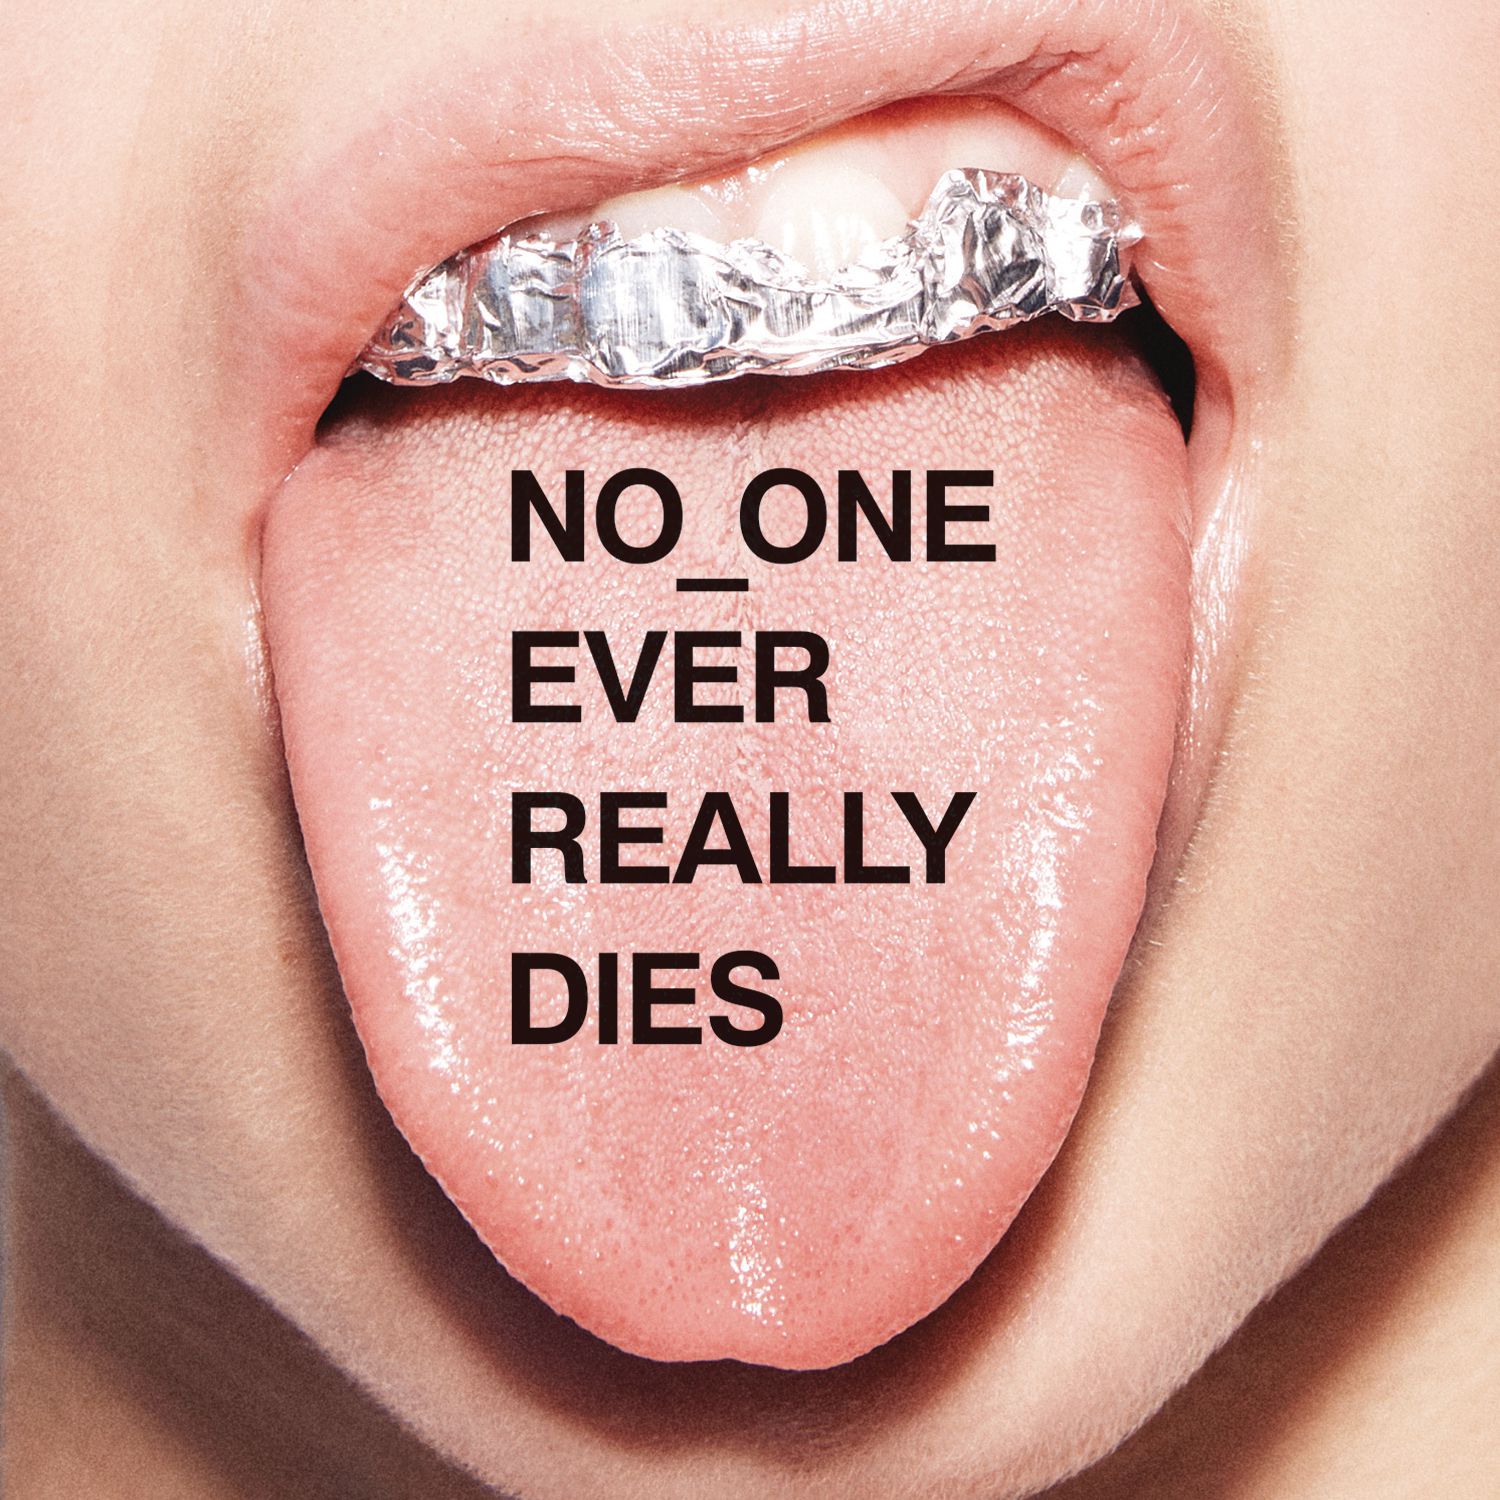 Our review of 'No One Ever Really Dies' by N.E.R.D.